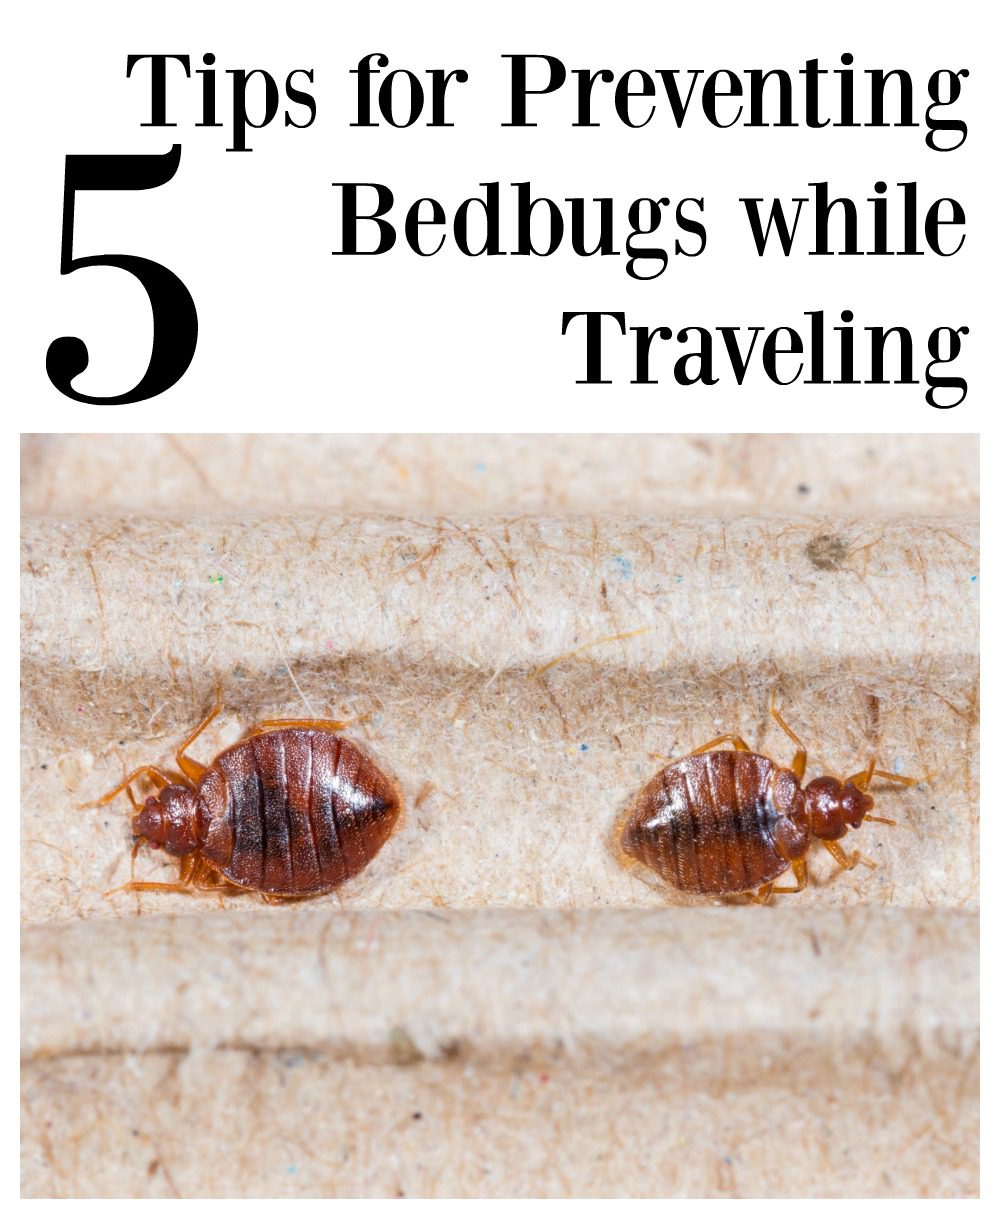 5 tips for preventing bedbugs while traveling